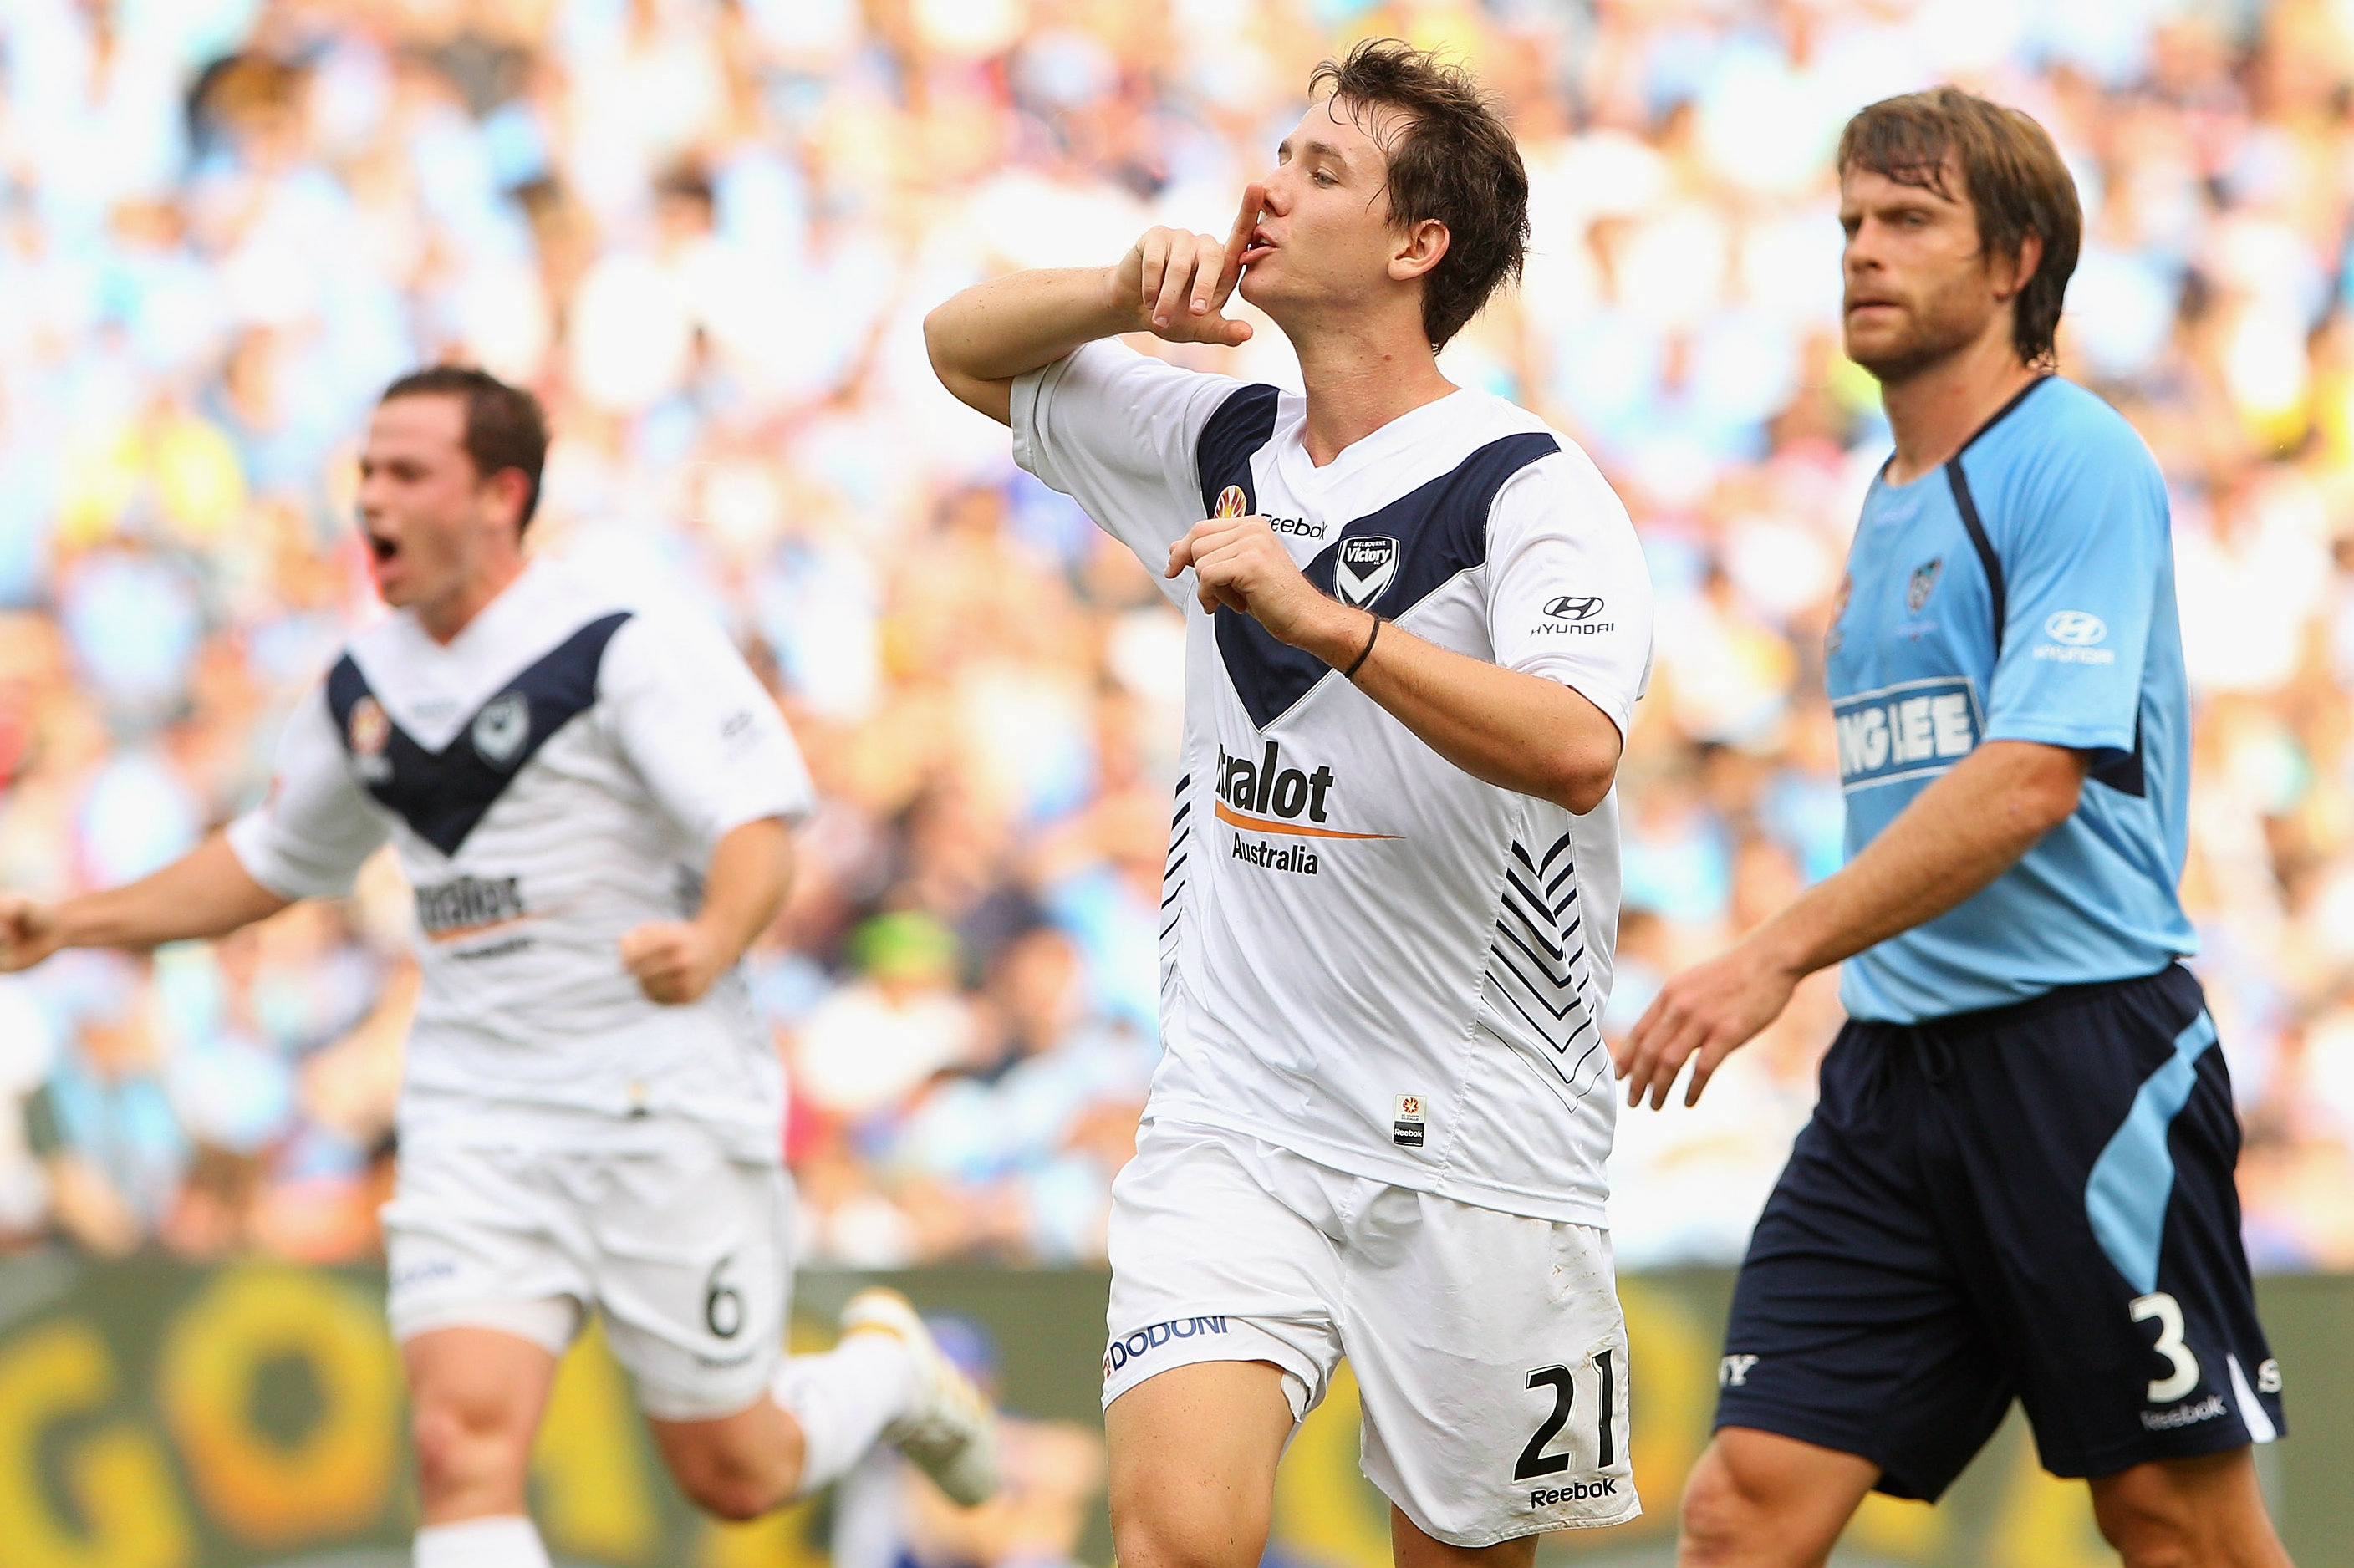 Robbie Kruse silences the Sydney FC fans with his goal in the Grand Final qualifier in 2010